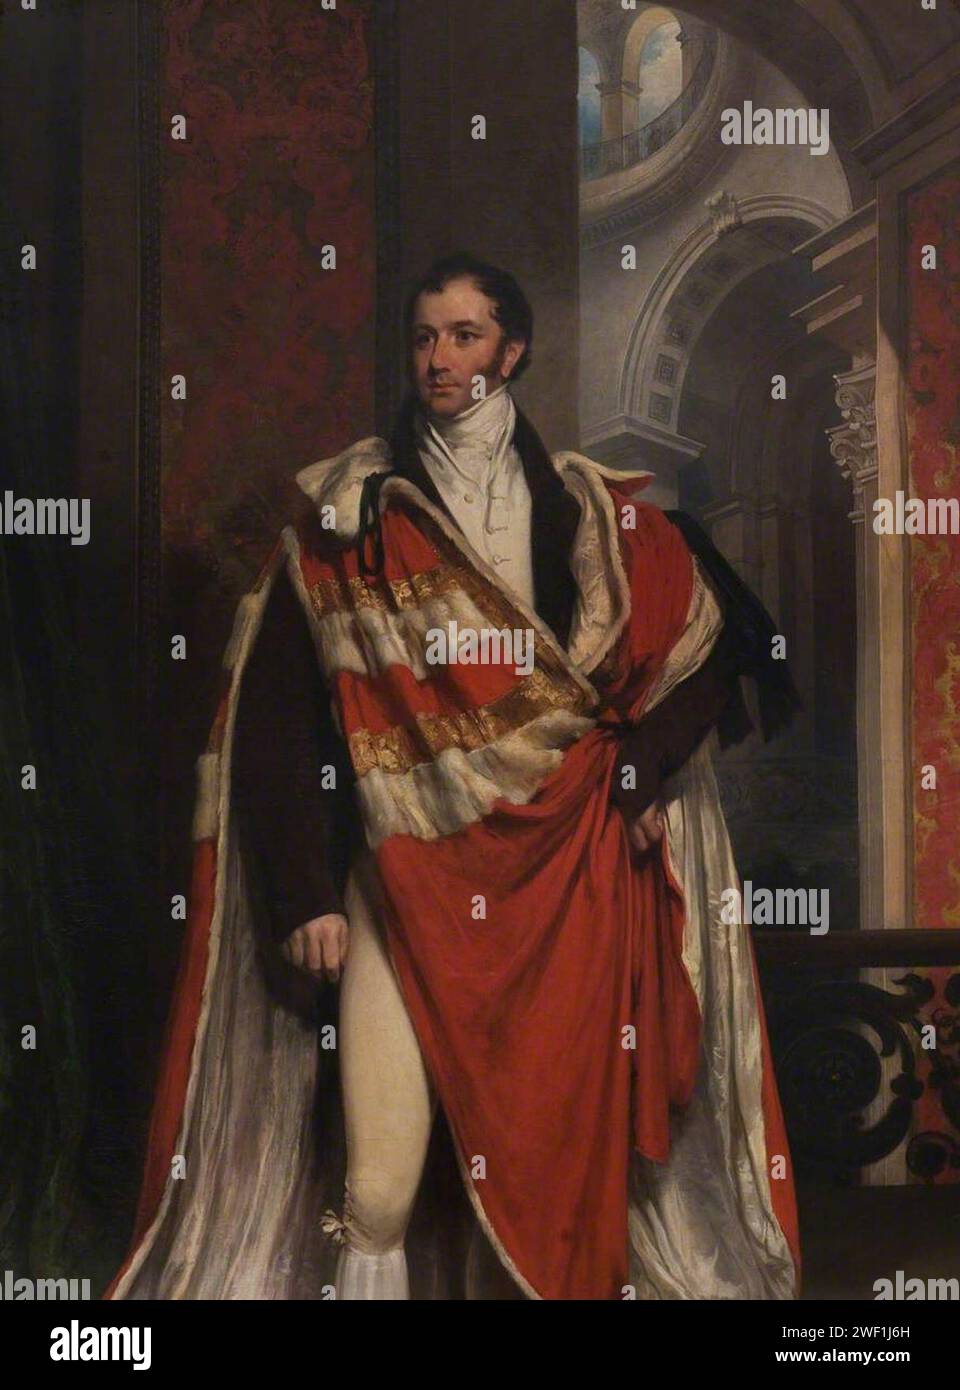 Archibald Kennedy, 1st Marquess of Ailsa, by William Owen. Stock Photo